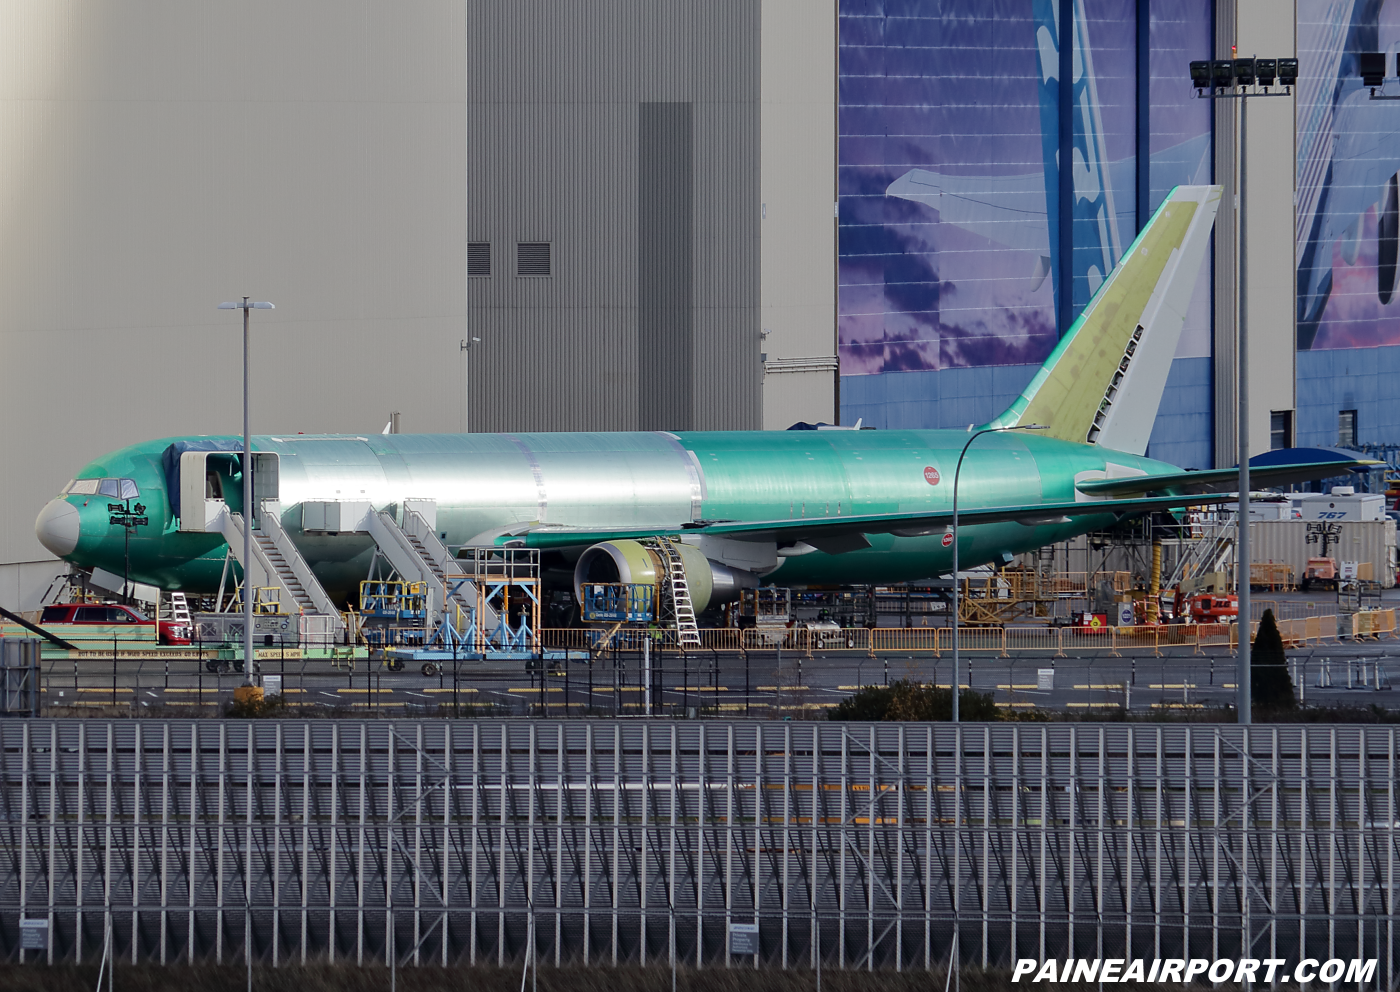 Longhao Airlines 767 at KPAE Paine Field